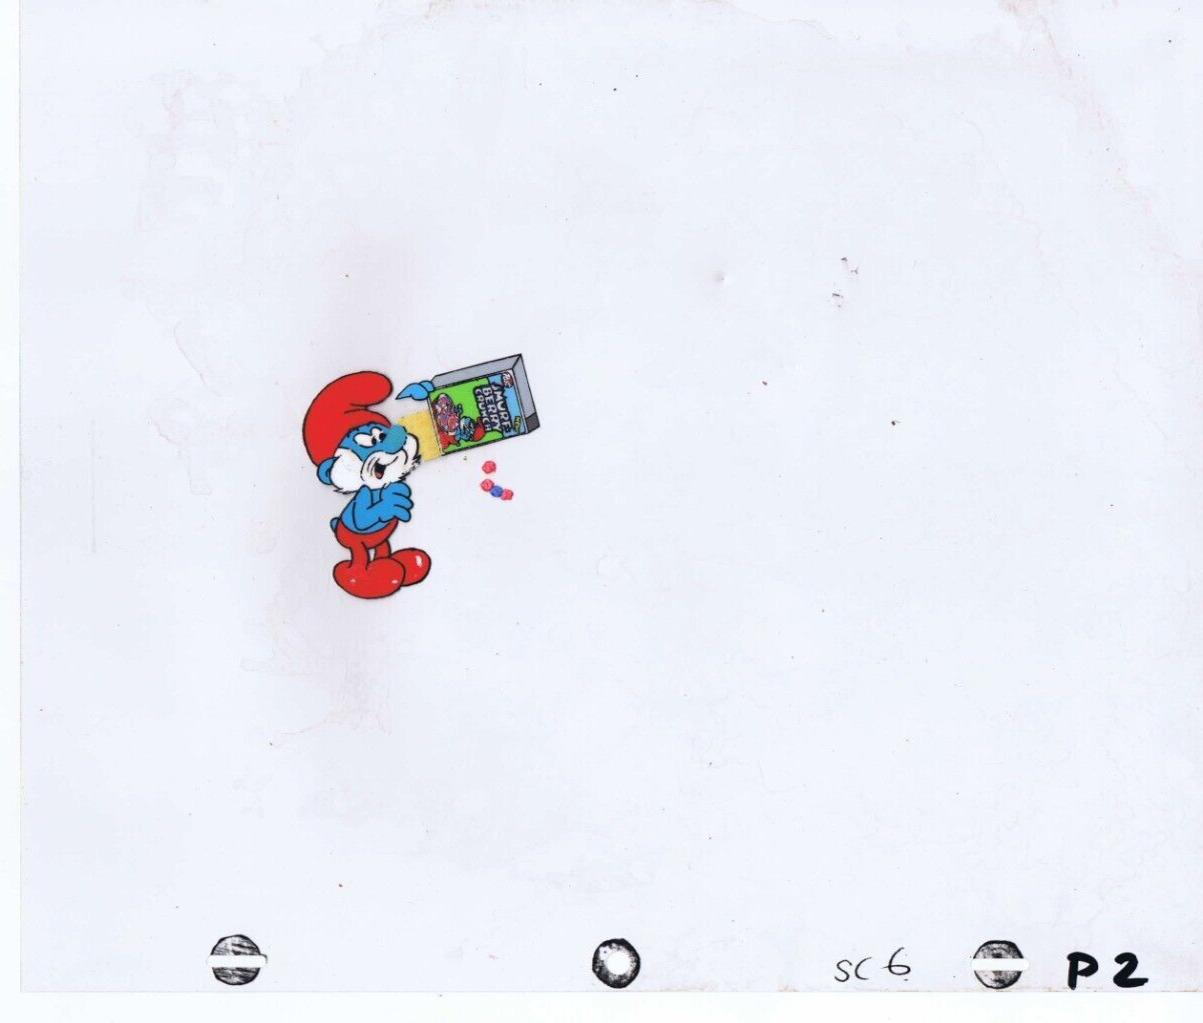 Smurfs Original Art Hand Painted Animation Cel Post Cereal Commercial SC6, P2